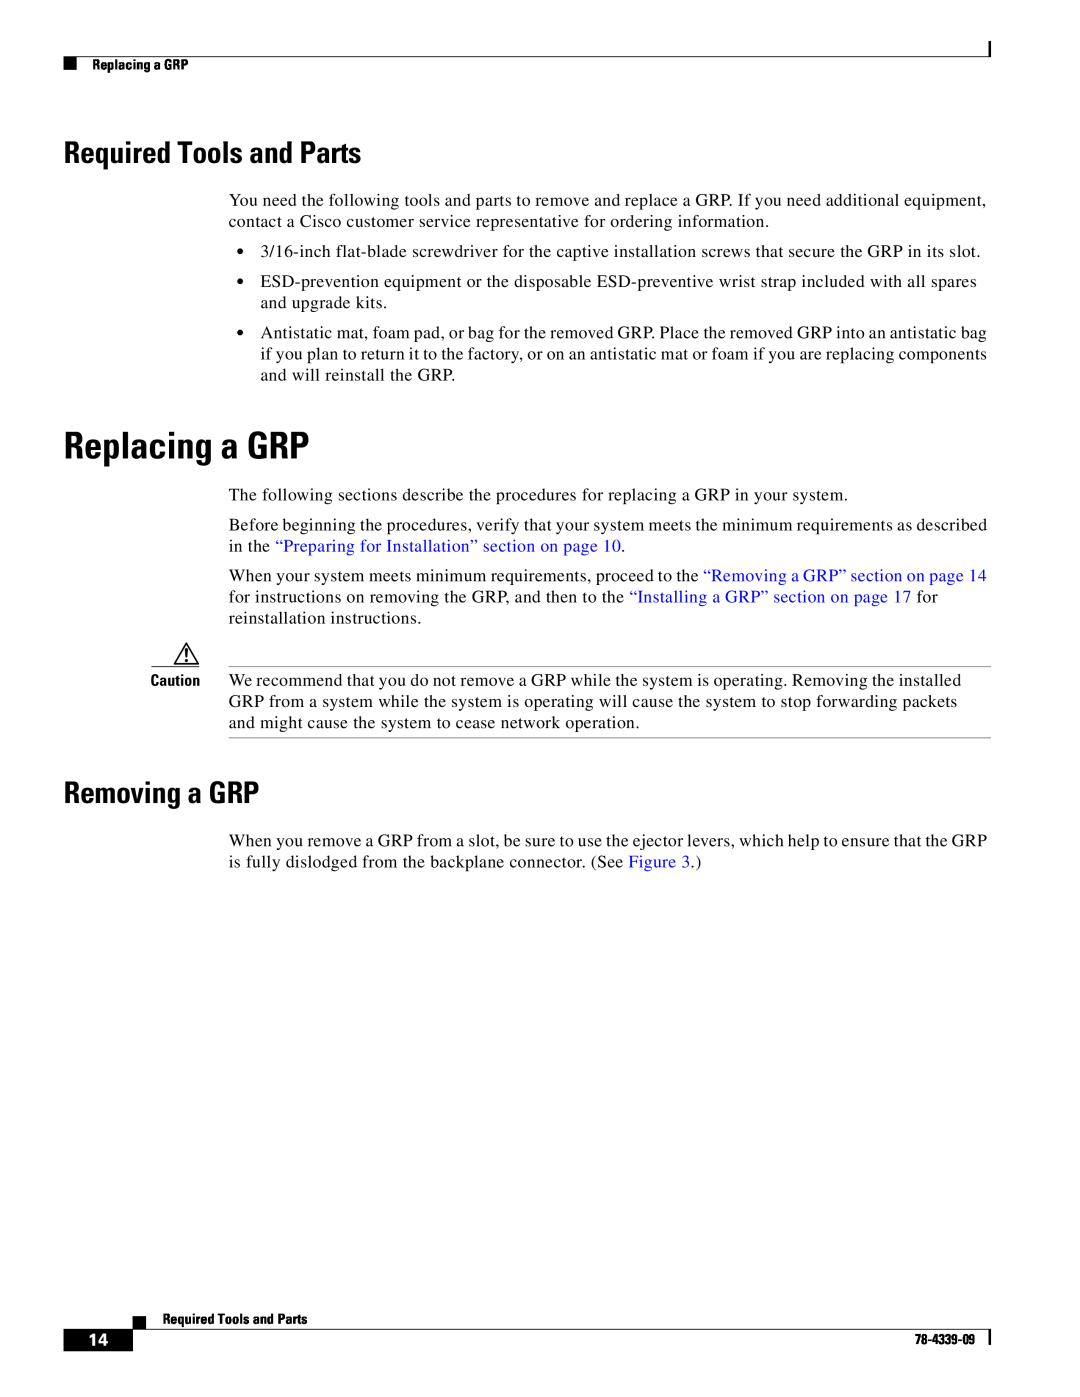 Cisco Systems GRP-B manual Replacing a GRP, Required Tools and Parts, Removing a GRP 